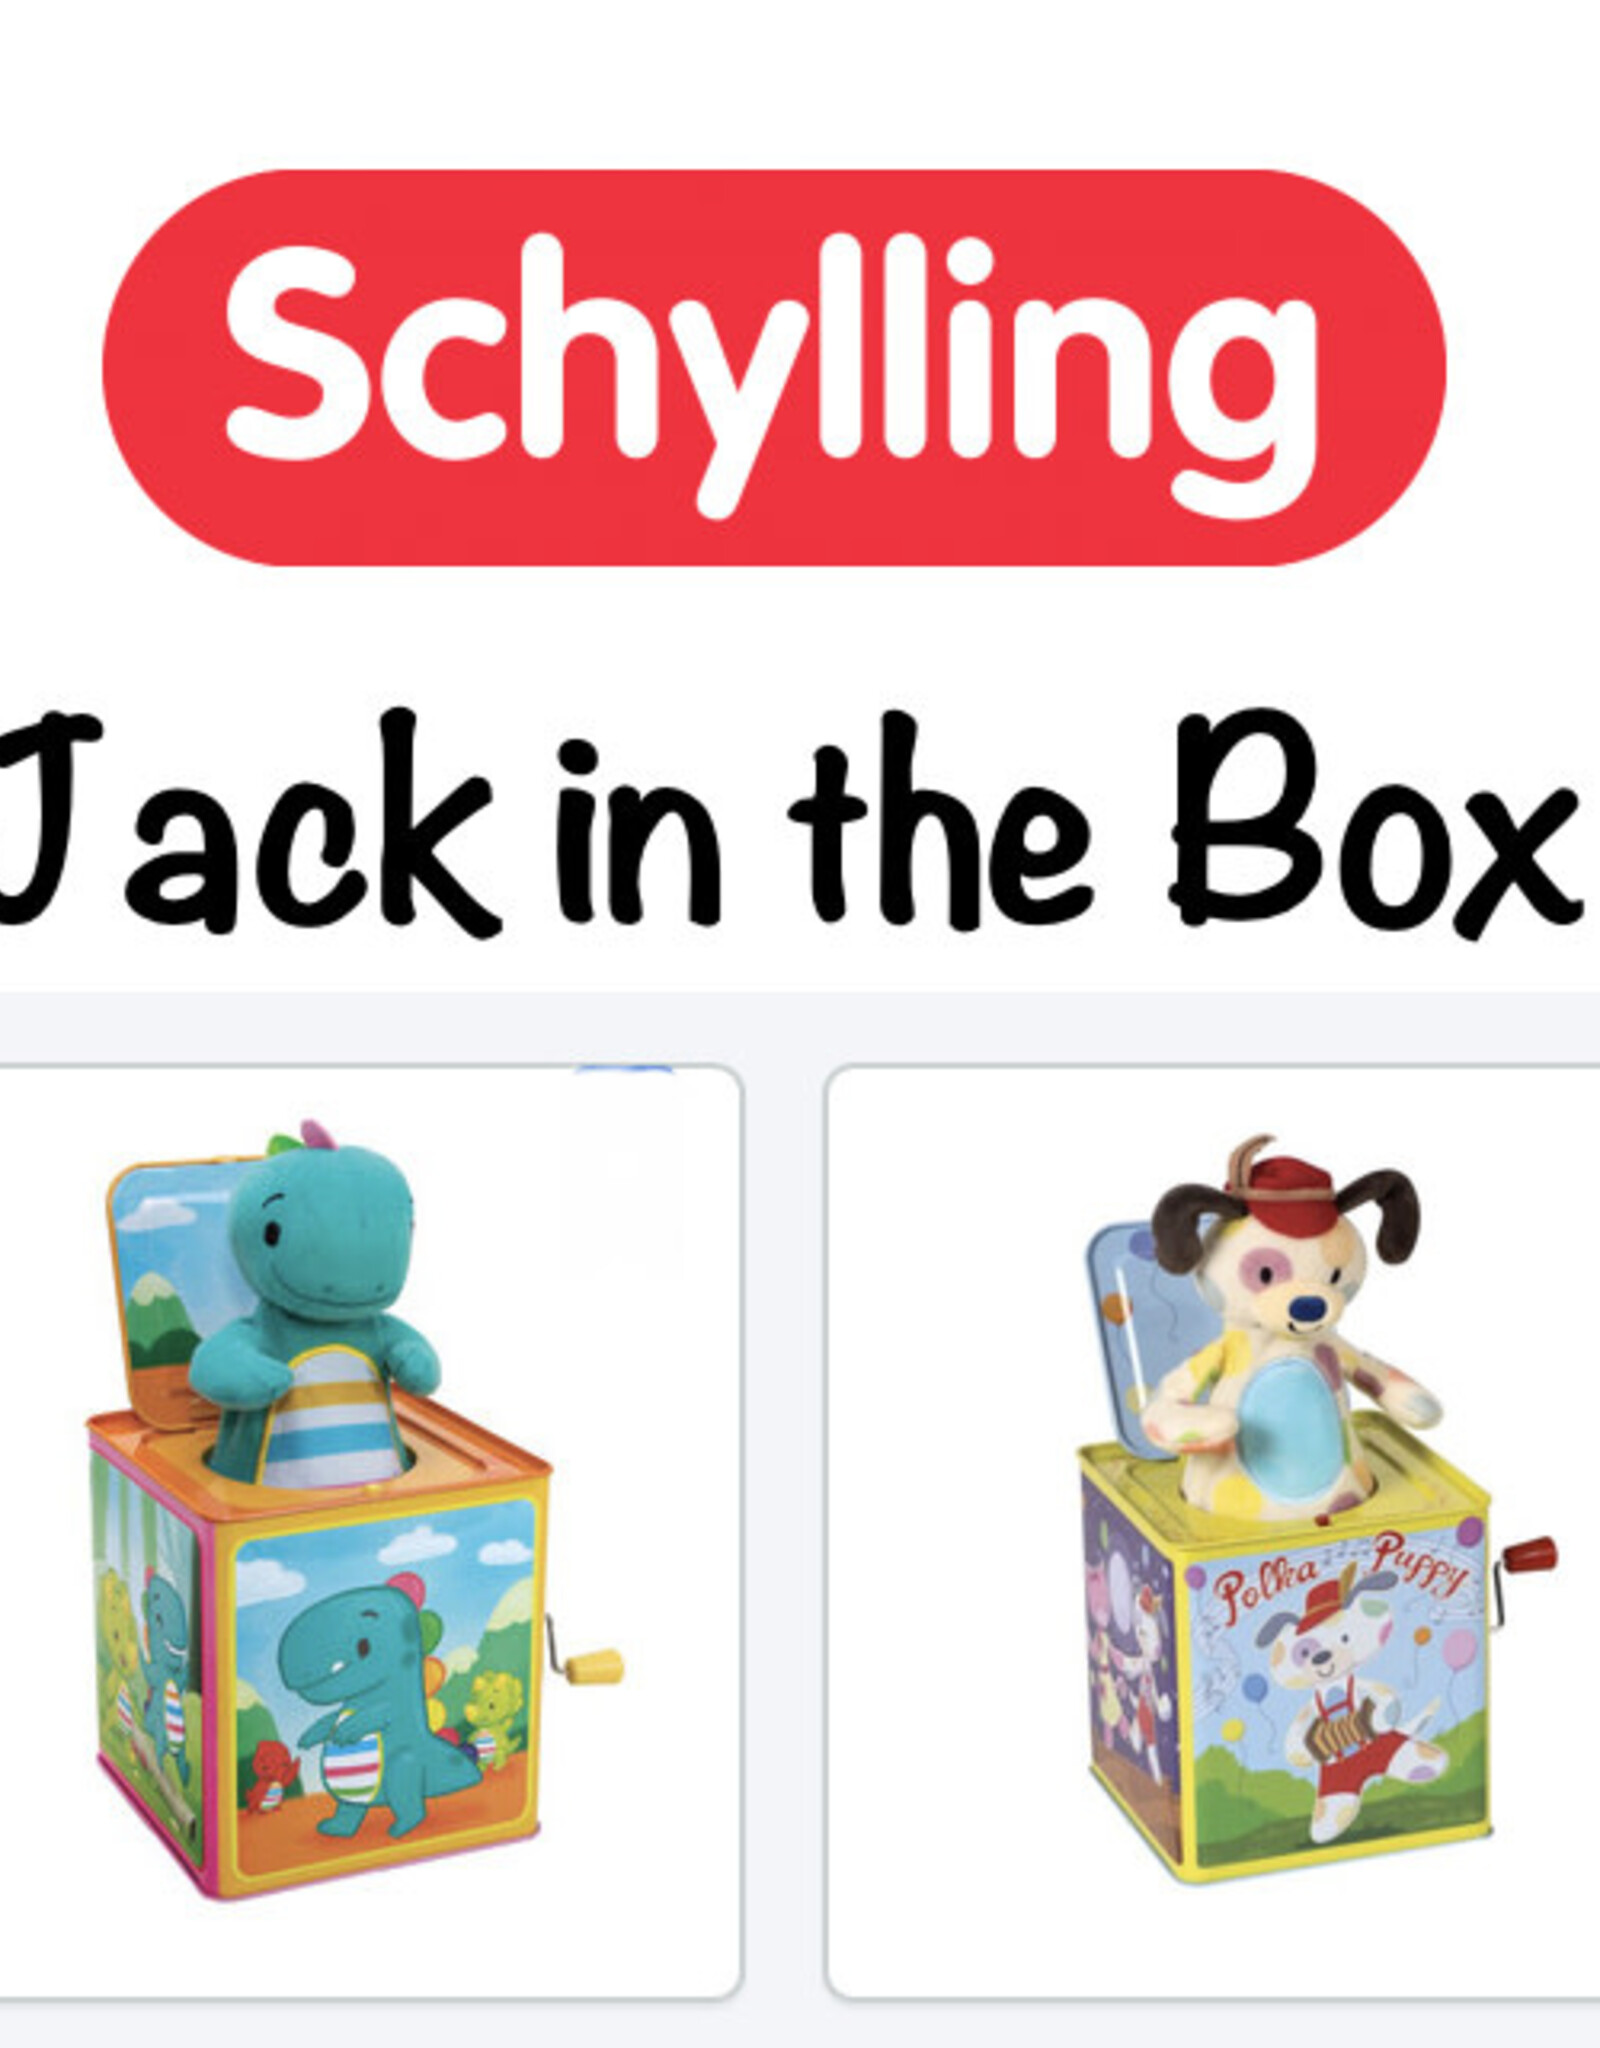 Schylling Jack in the Box